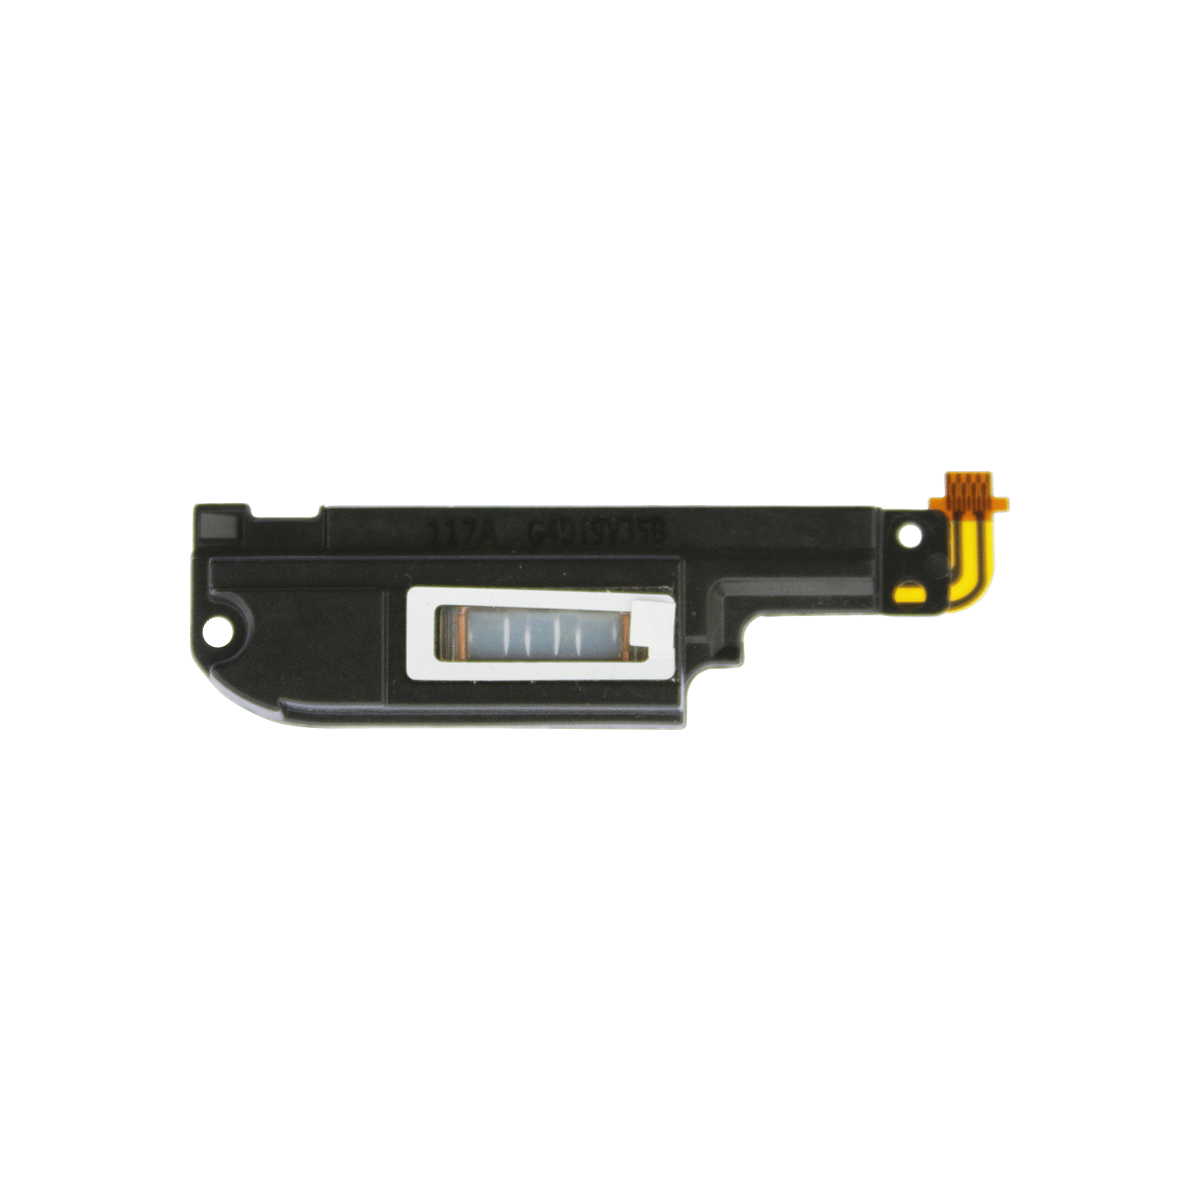 HTC One M9 Loudspeaker Replacement